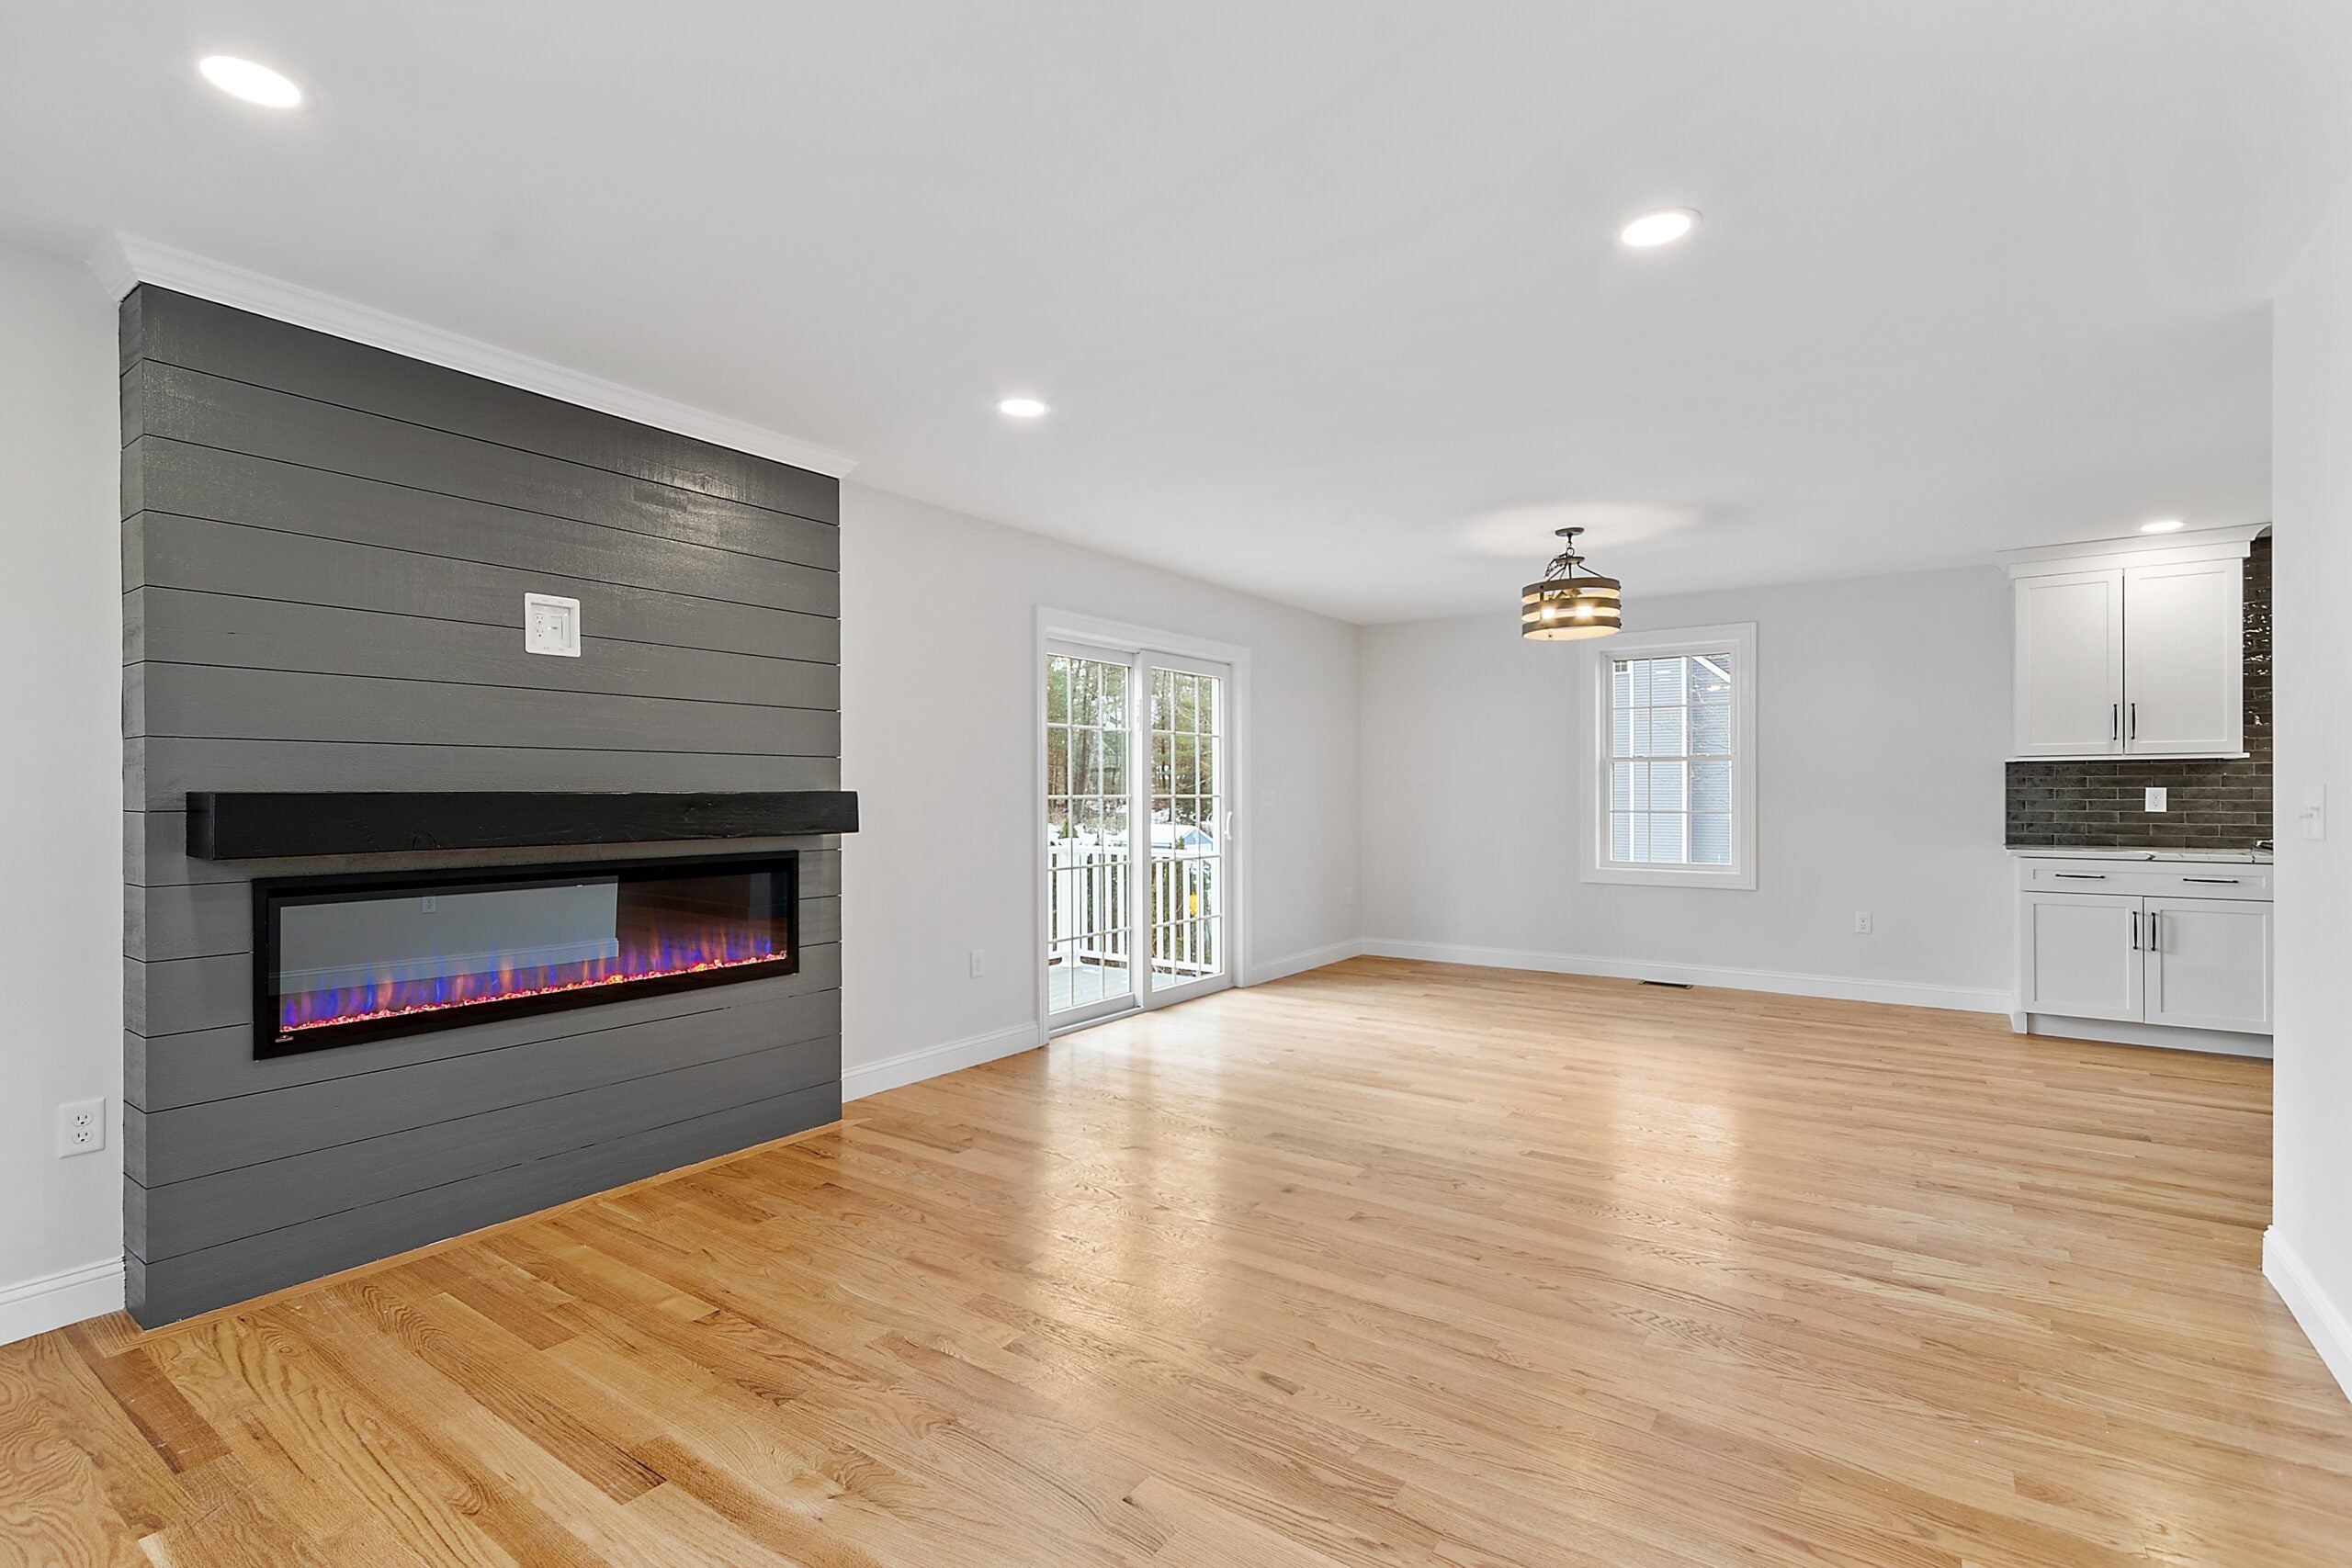 A view of a fireplace that extends to the ceiling. It is electric with a long, narrow glass screen. The fireplace is clad in a charcoal-colored material. The room has recessed lighting and hardwood flooring, and one can see a drum-shade light fixture, a slider, kitchen cabinetry, and a window in the background.